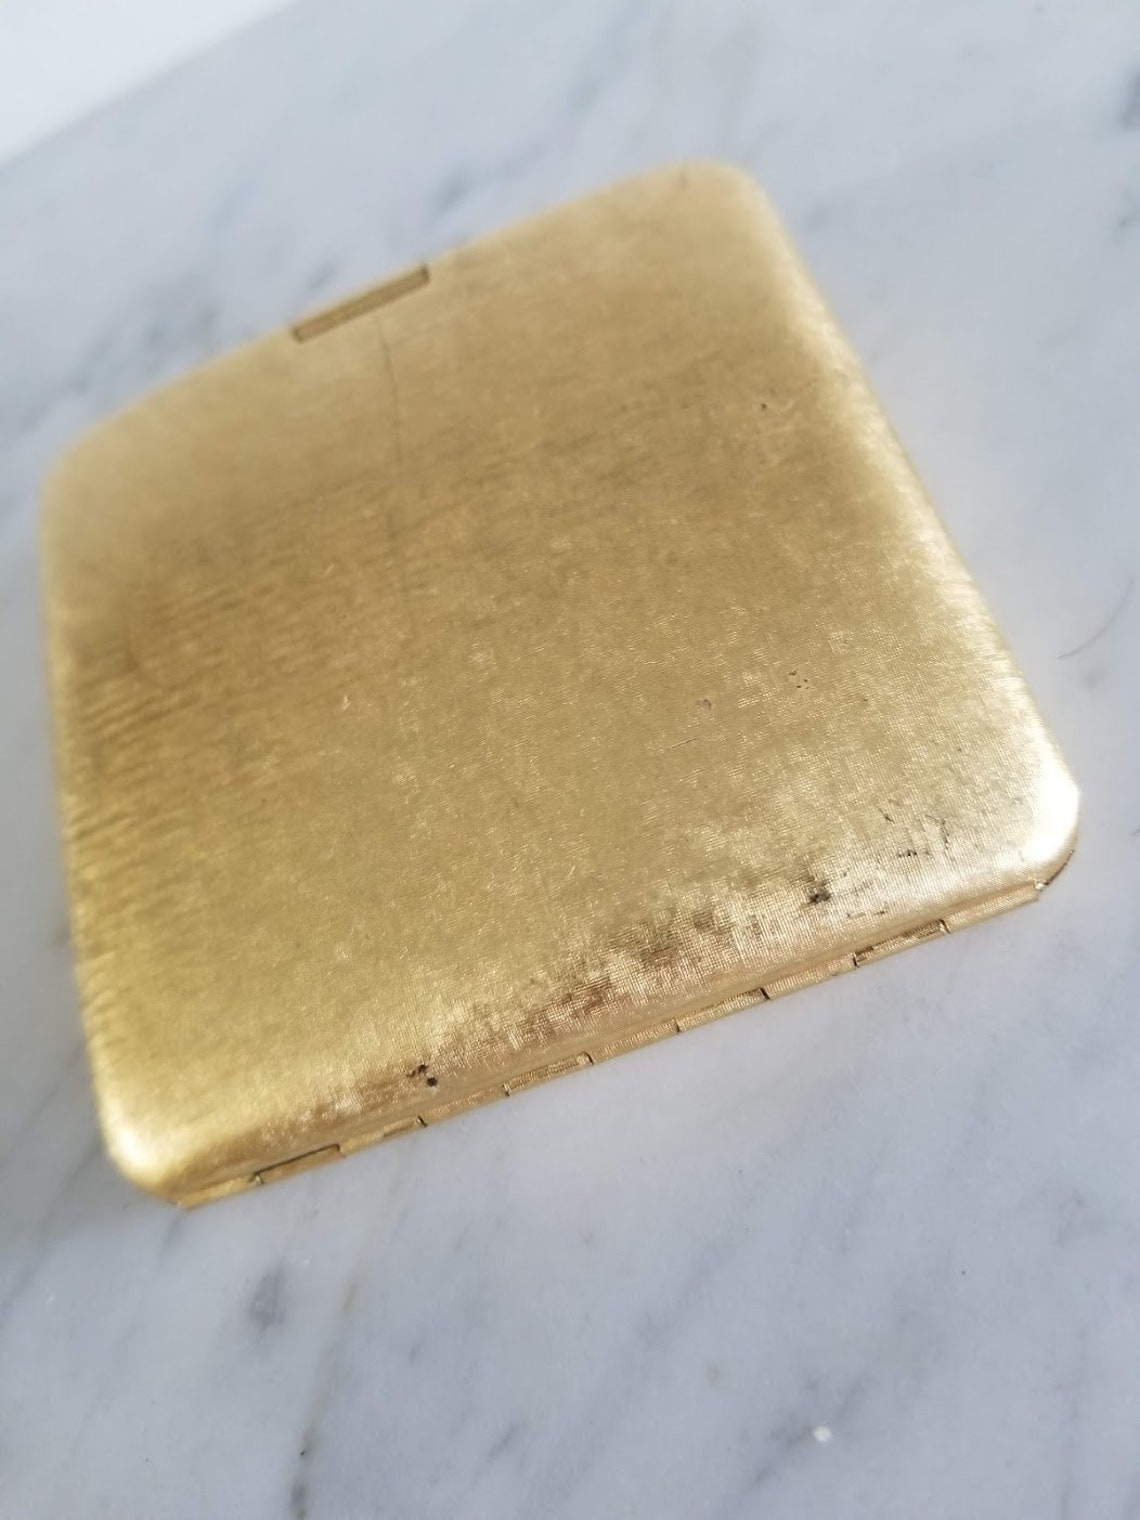 Vintage Avon Imperial Gold Compact With Puff Vintage Gold | Etsy